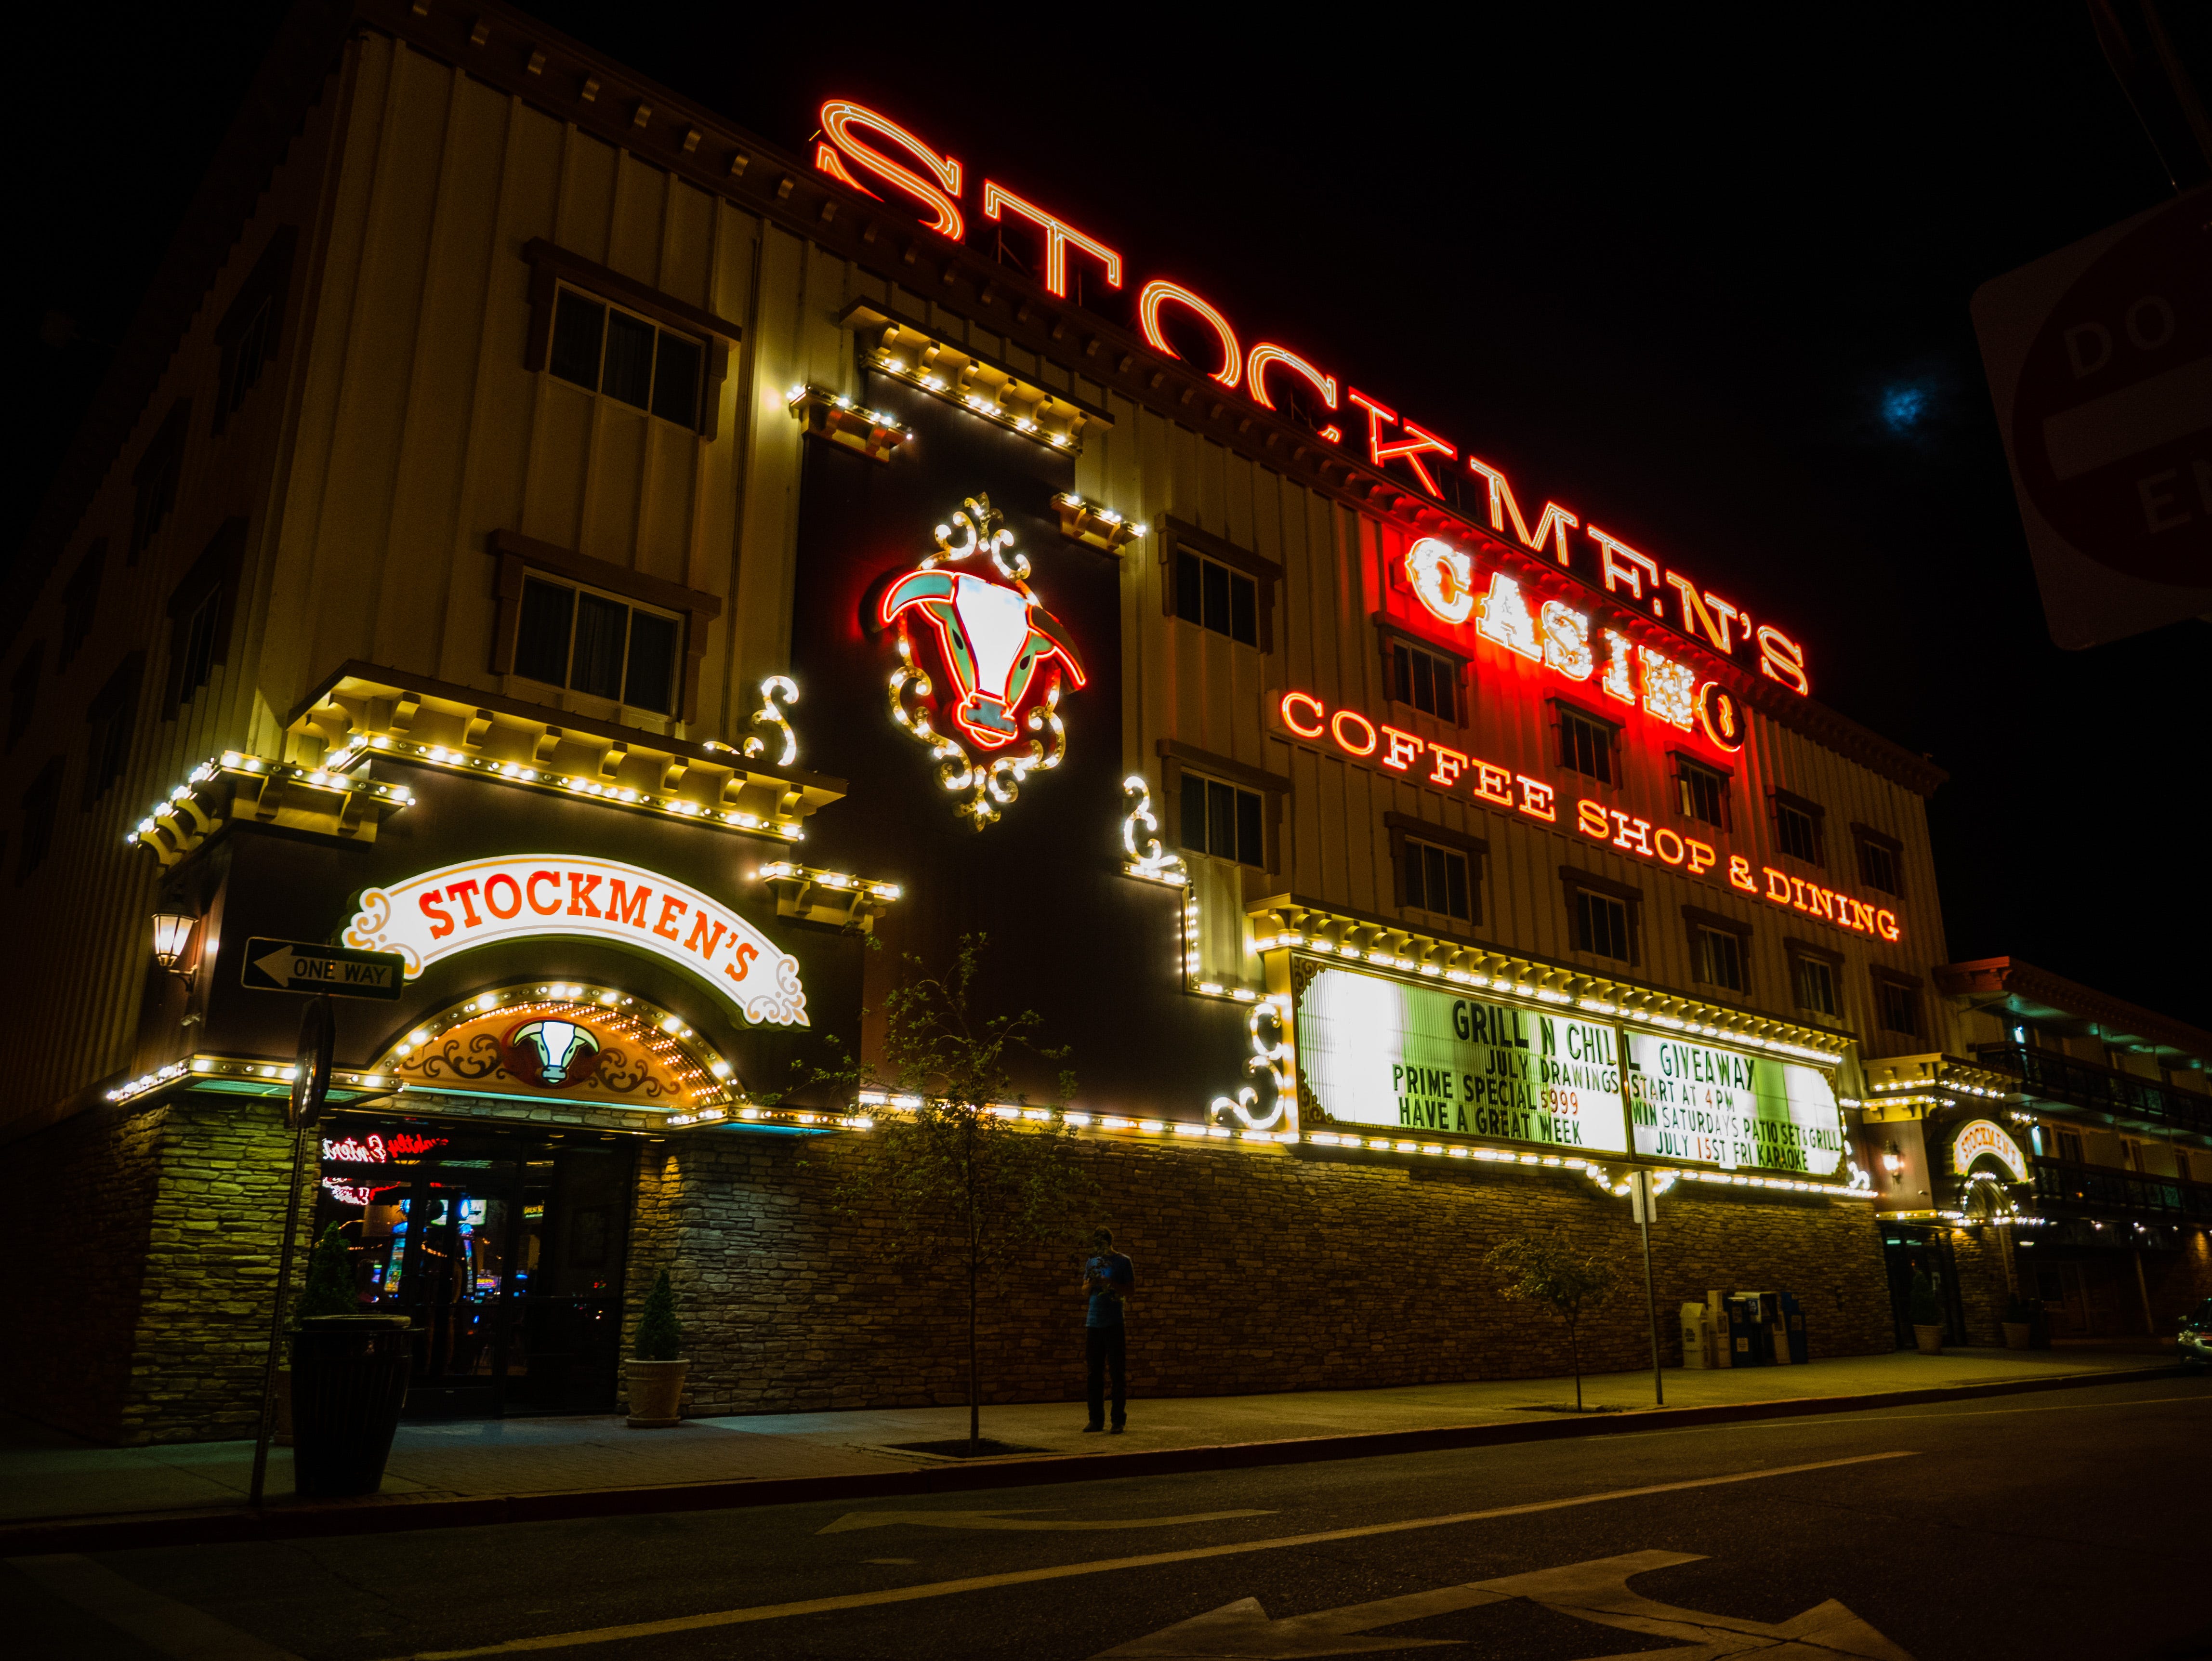 Evening photograph of the facade of the "STOCKMEN'S CASINO". The building is three plus stories tall. On top, "STOCKMEN'S" is written in oversized neon nearly the width of the entire building. Below, in letters nearly as large, is "CASINO" The letters are lit sequentially until the whole word is visible; as the photo was taken, the letters "C-A-S-I-N" are lit and the "O" is not lit. Below that, are "COFFEE SHOP & DINING" also in neon. To the left, additional lights decorate a lit head of a mult-colored steer's head looking out from the building. An additional row of lights outline the border between the ground floor and the floors above. And on the corner of the building, at the entrance, is a curved, lit, banner, "STOCKMEN'S". A giant marque has the words, "GRILL N CHILL GIVEAWAY / JULY DRAWINGS START AT 4PM / PRIME SPECIAL $9.99 WIN SATURDAYS PATIO SET AND GRILL / HAVE A GREAT WEEK / JULY 15ST FRIDAY KARAOKE". In front of the building, a man stands on the sidewalk, appearing to look at his phone.